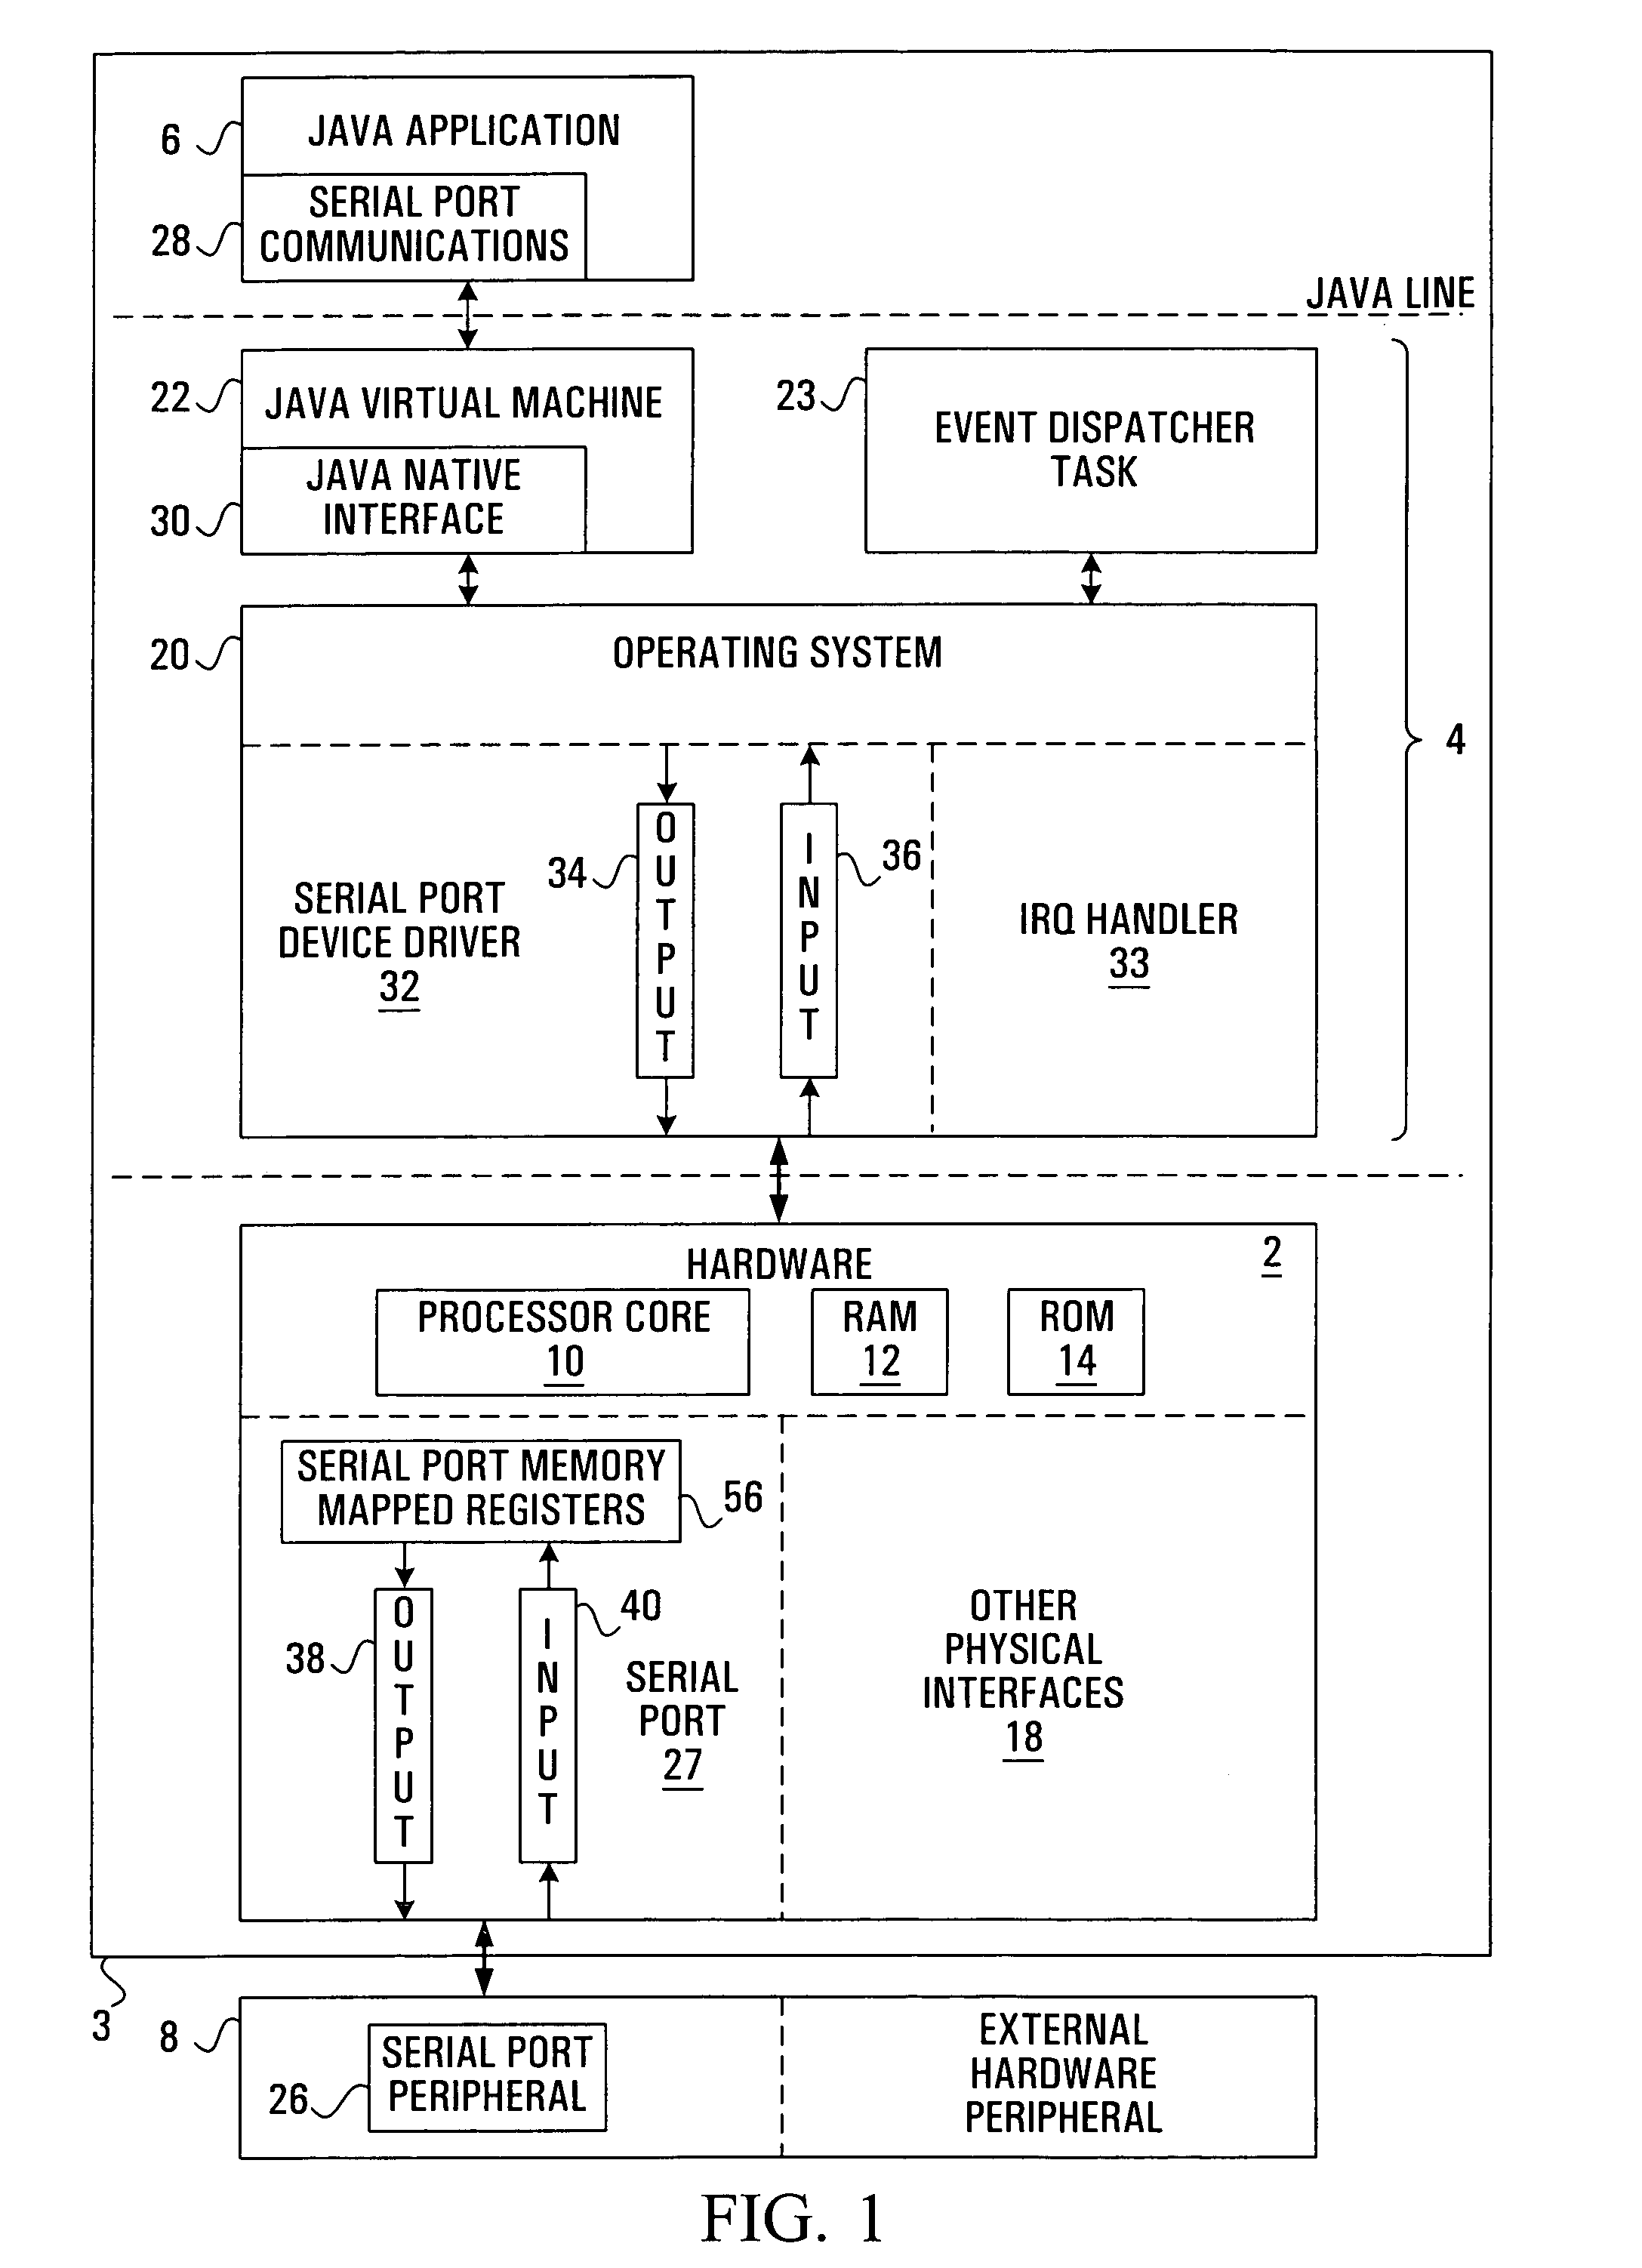 Methods and systems for applications to interact with hardware